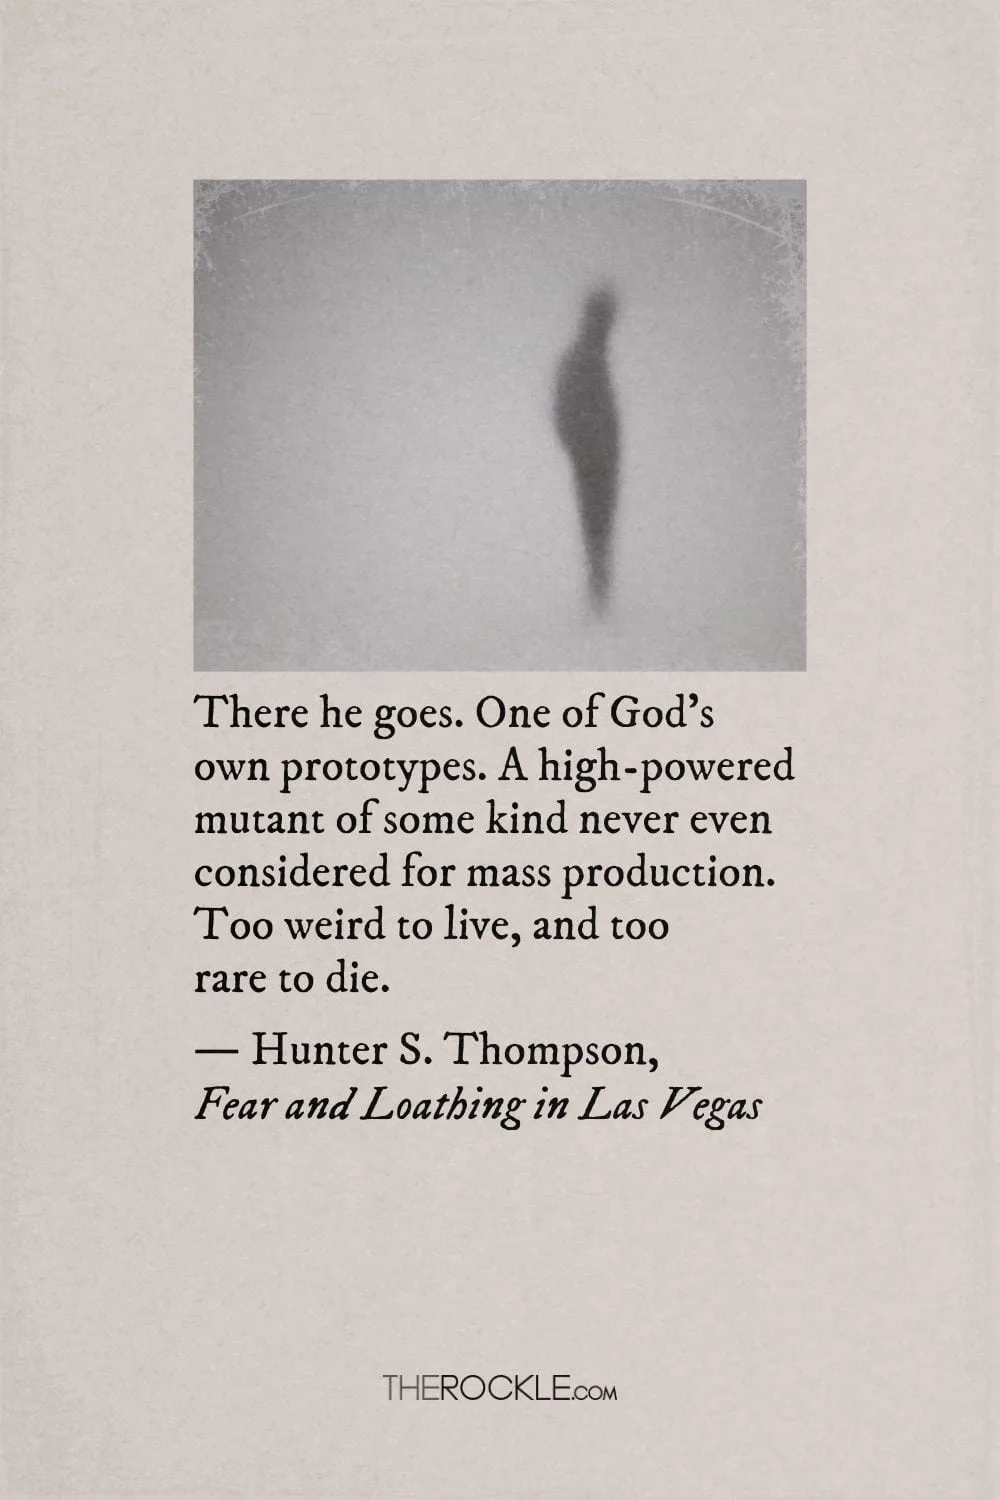 Thompson's quote about unique people